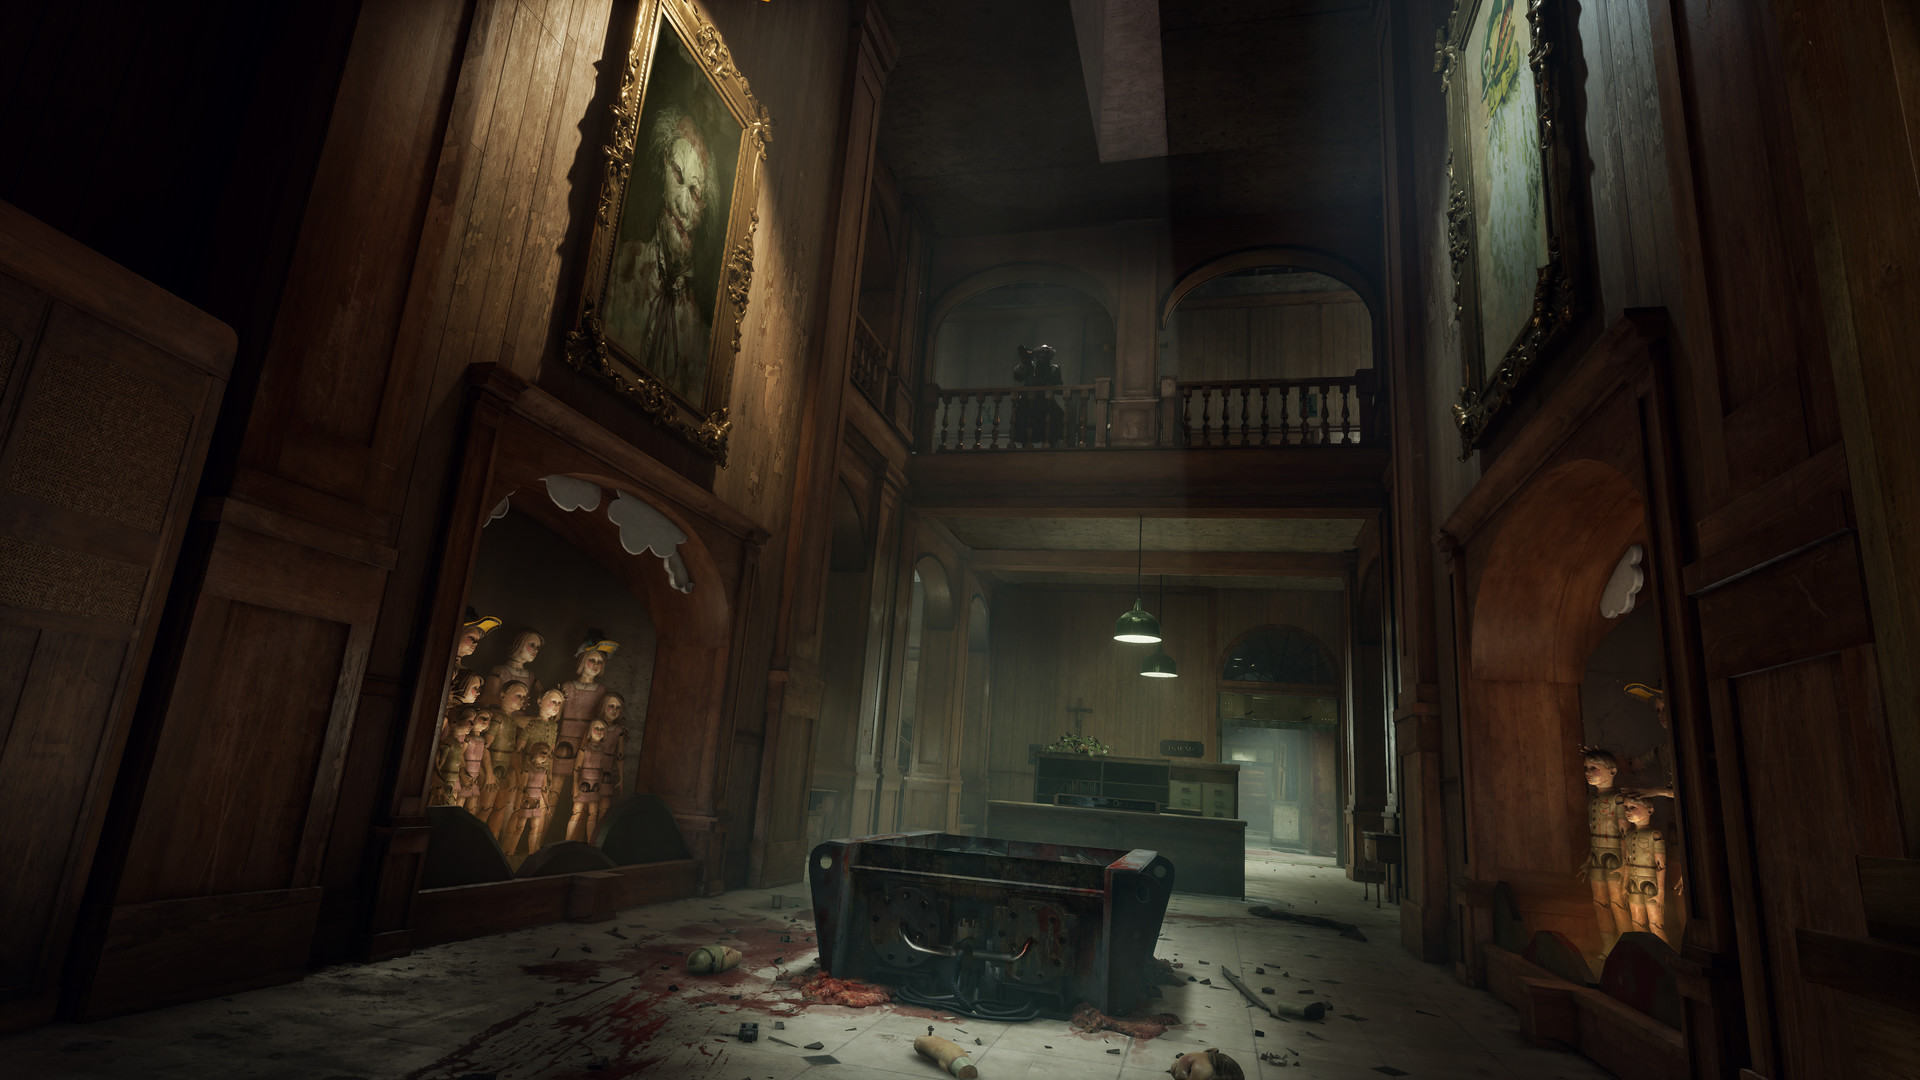 The Outlast Trials is “More Like a TV Series” – Red Barrels